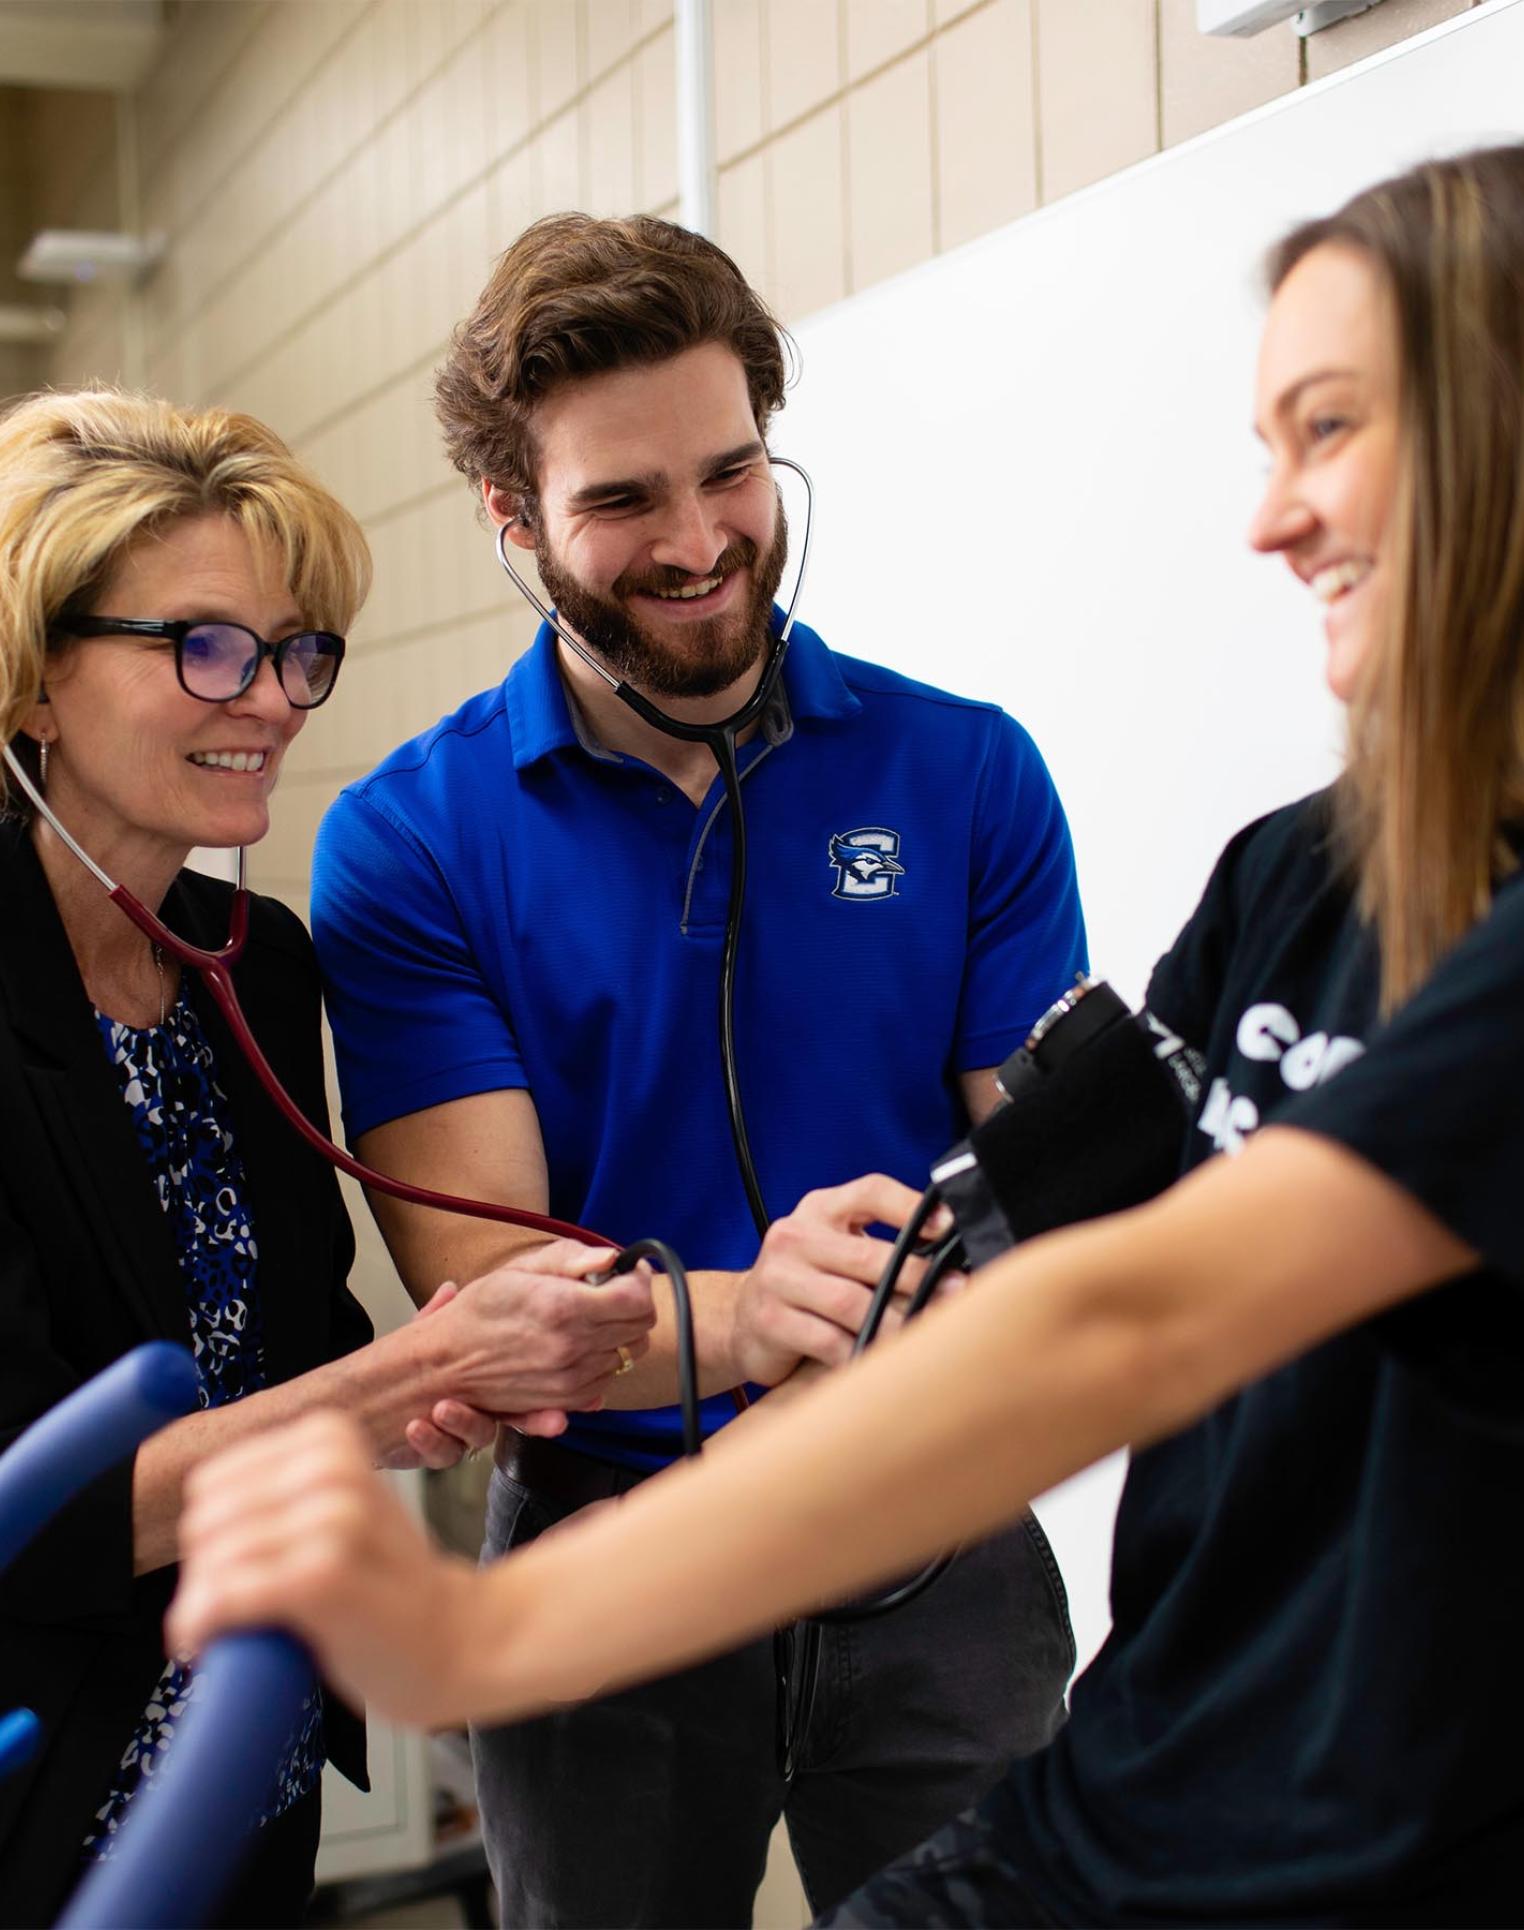 Creighton health sciences students doing hands-on learning with faculty